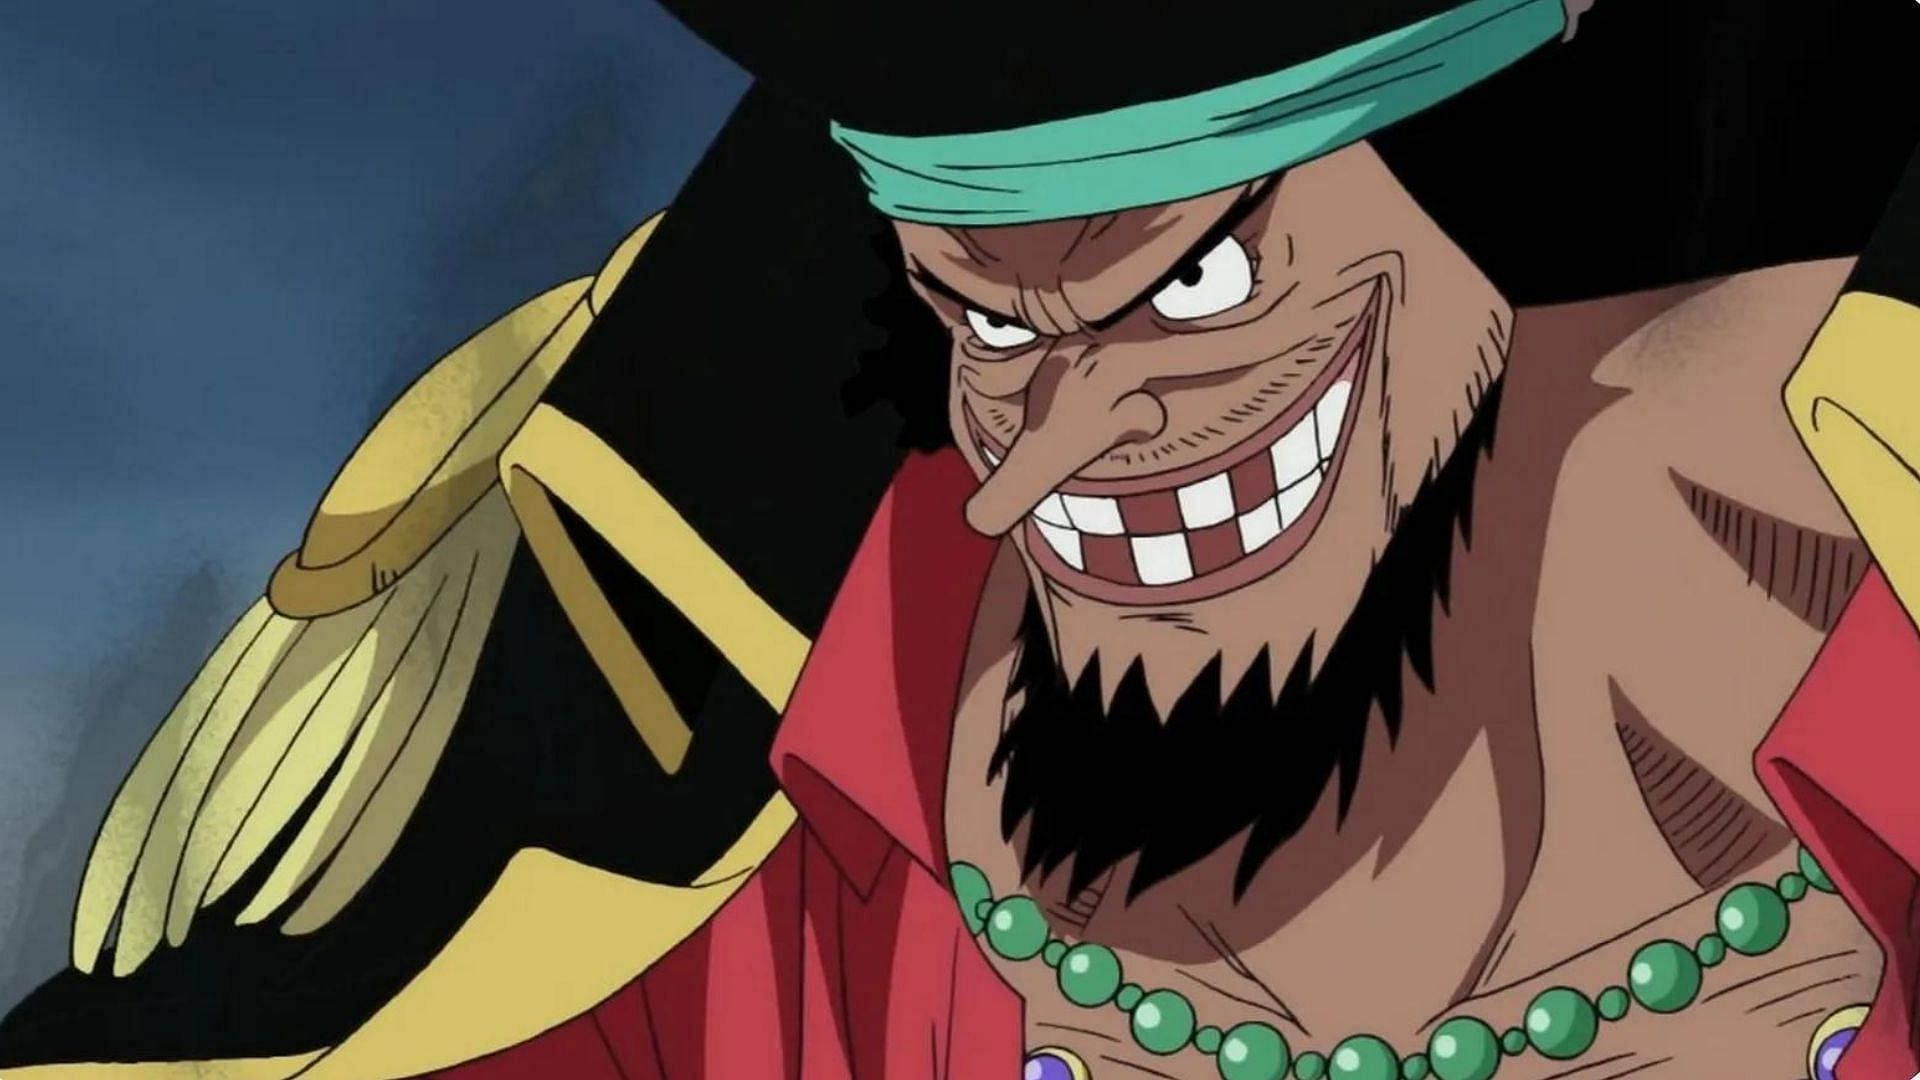 Blackbeard set up to conquer One Piece